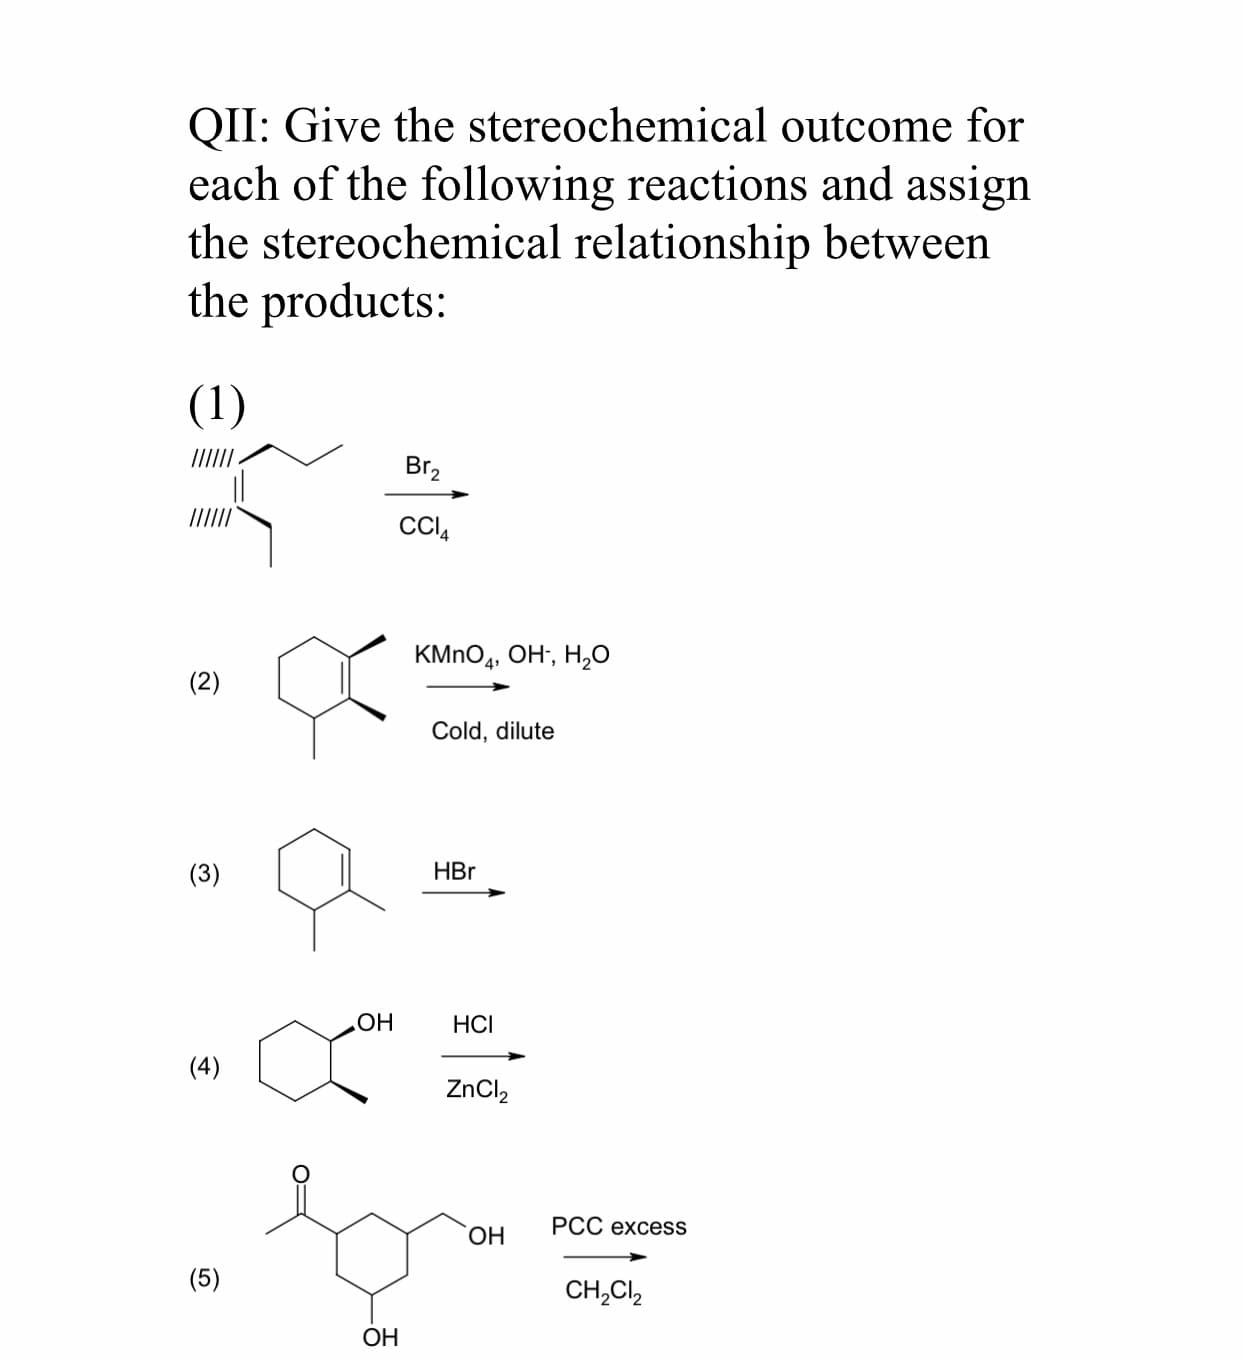 QII: Give the stereochemical outcome for
each of the following reactions and assign
the stereochemical relationship between
the products:
(1)
Br,
CI,
KMnO,, Он, Н,о
(2)
Cold, dilute
(3)
HBr
НСІ
Но
(4)
ZnCl,
PCC excess
ОН
(5)
CH,CI,
ОН
